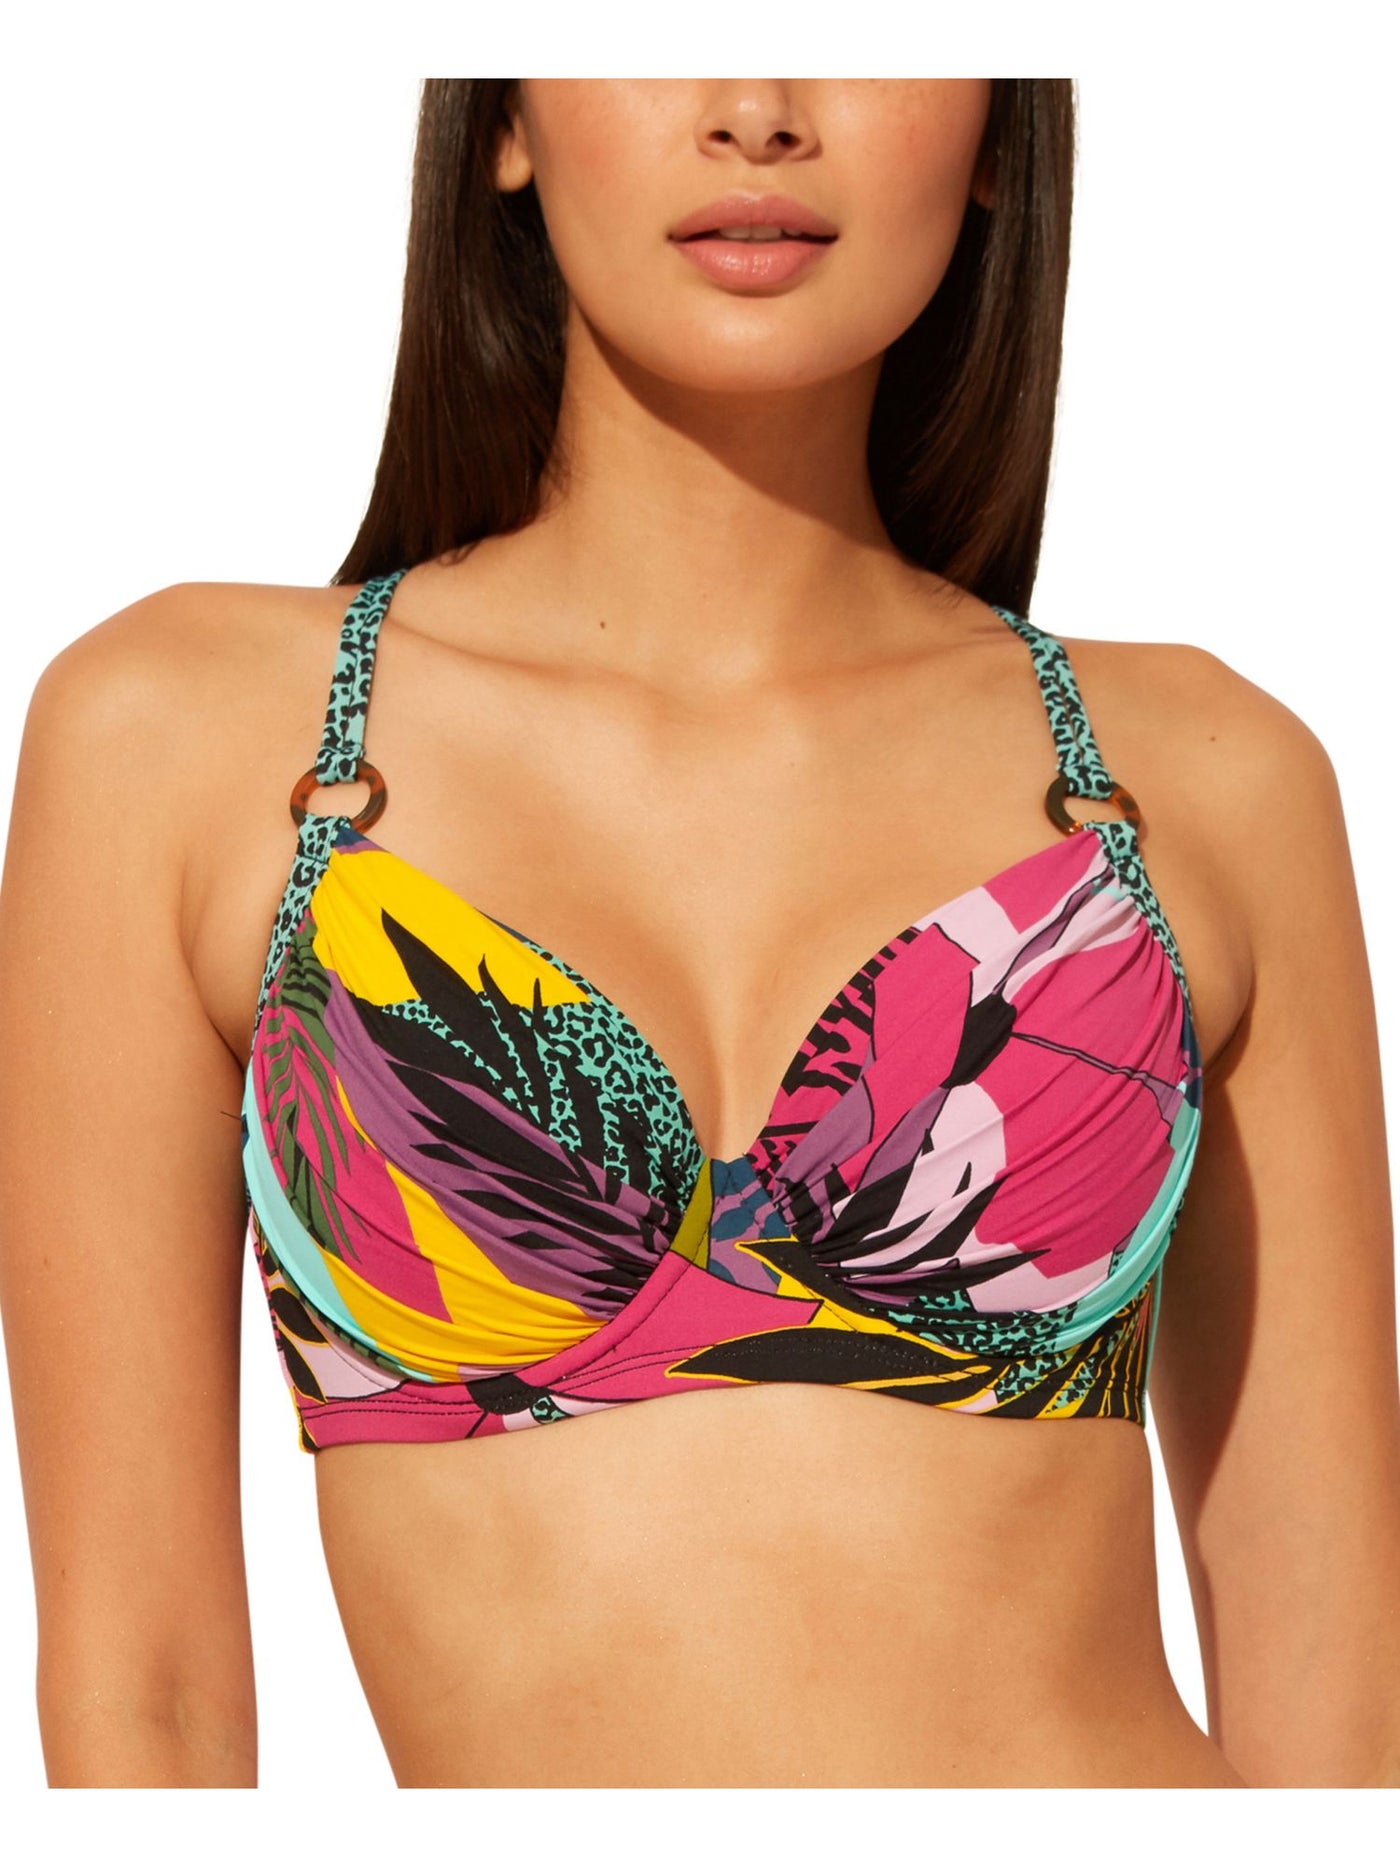 BLEU Women's Black Tropical Print Stretch Ring Molded Cup Sweetheart Bra Swimsuit Top 34D